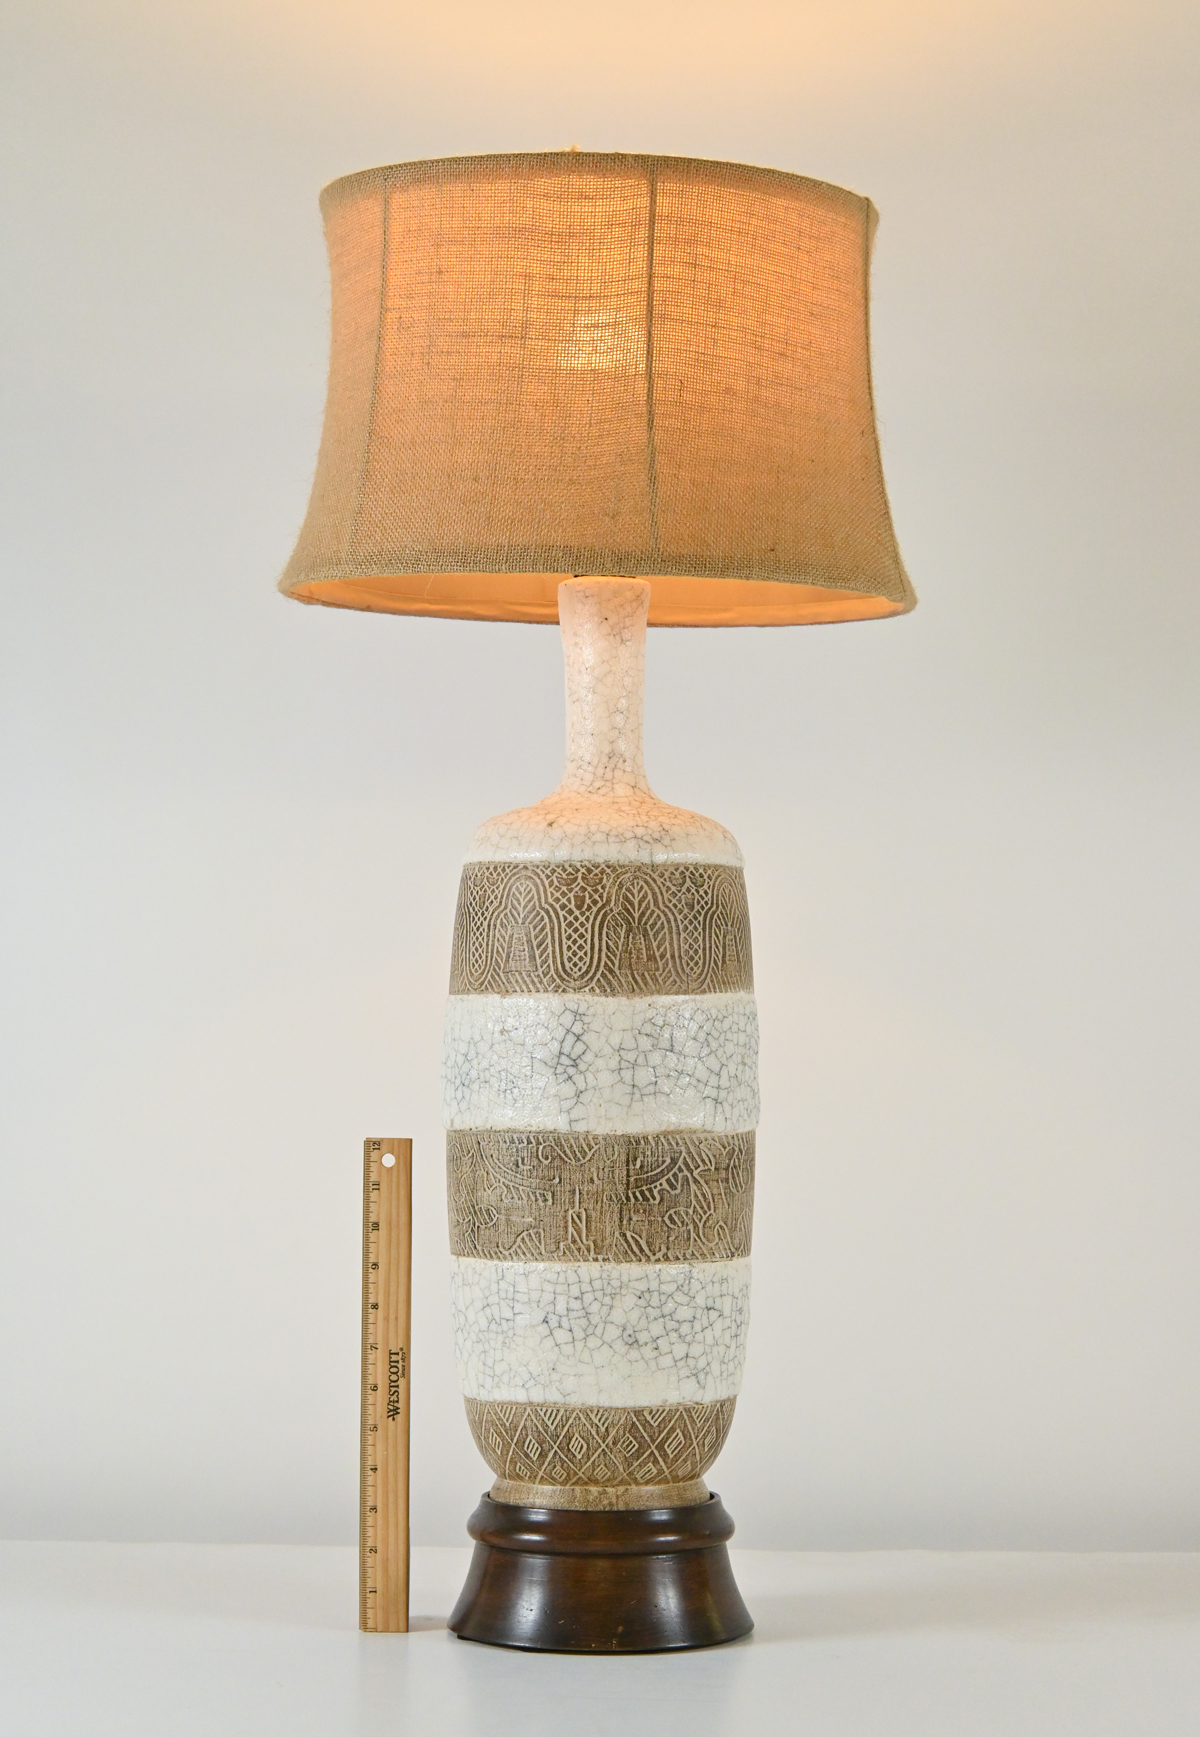 POTTERY LAMP AFTER UGO ZACCAGNINI: